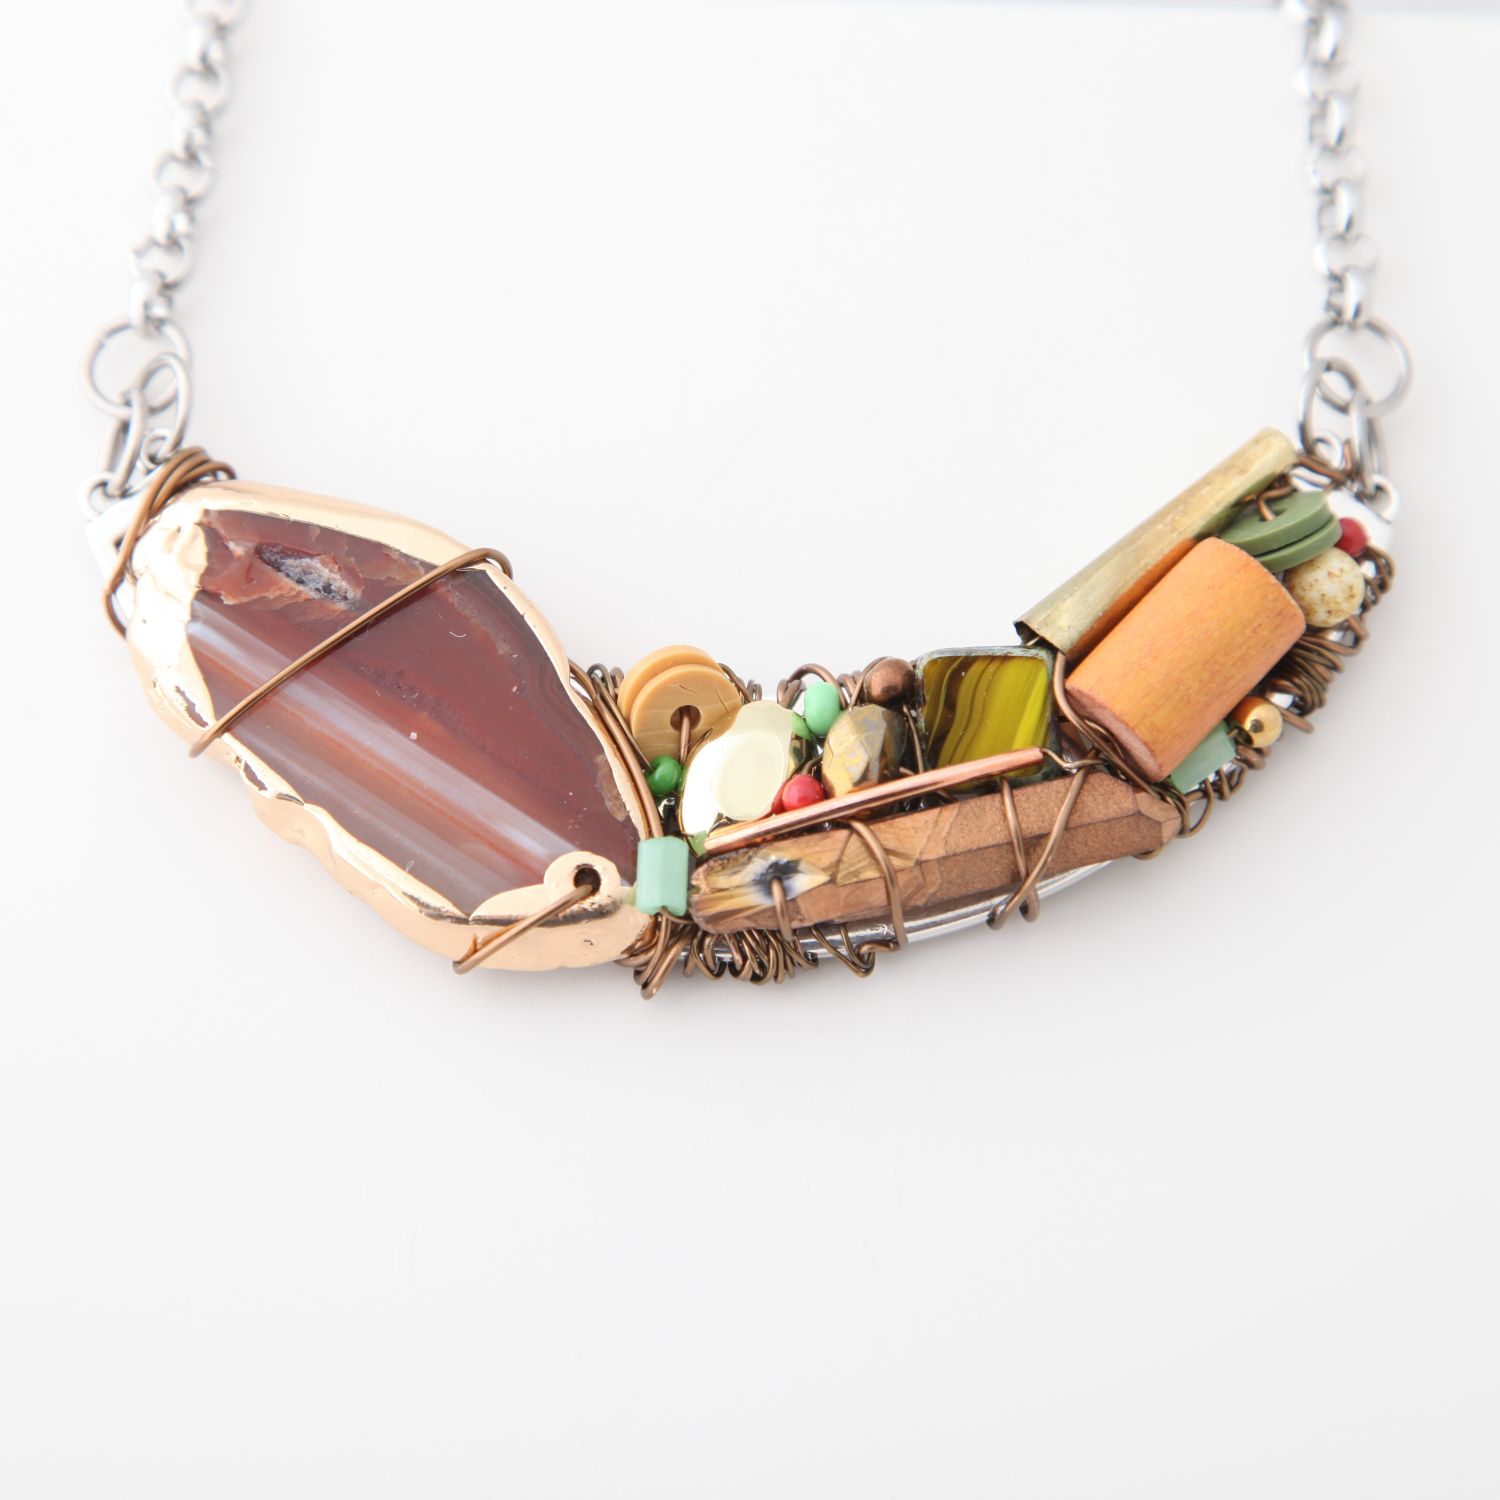 Farheen Ali: Autumn Crescent Necklace Product Image 1 of 2